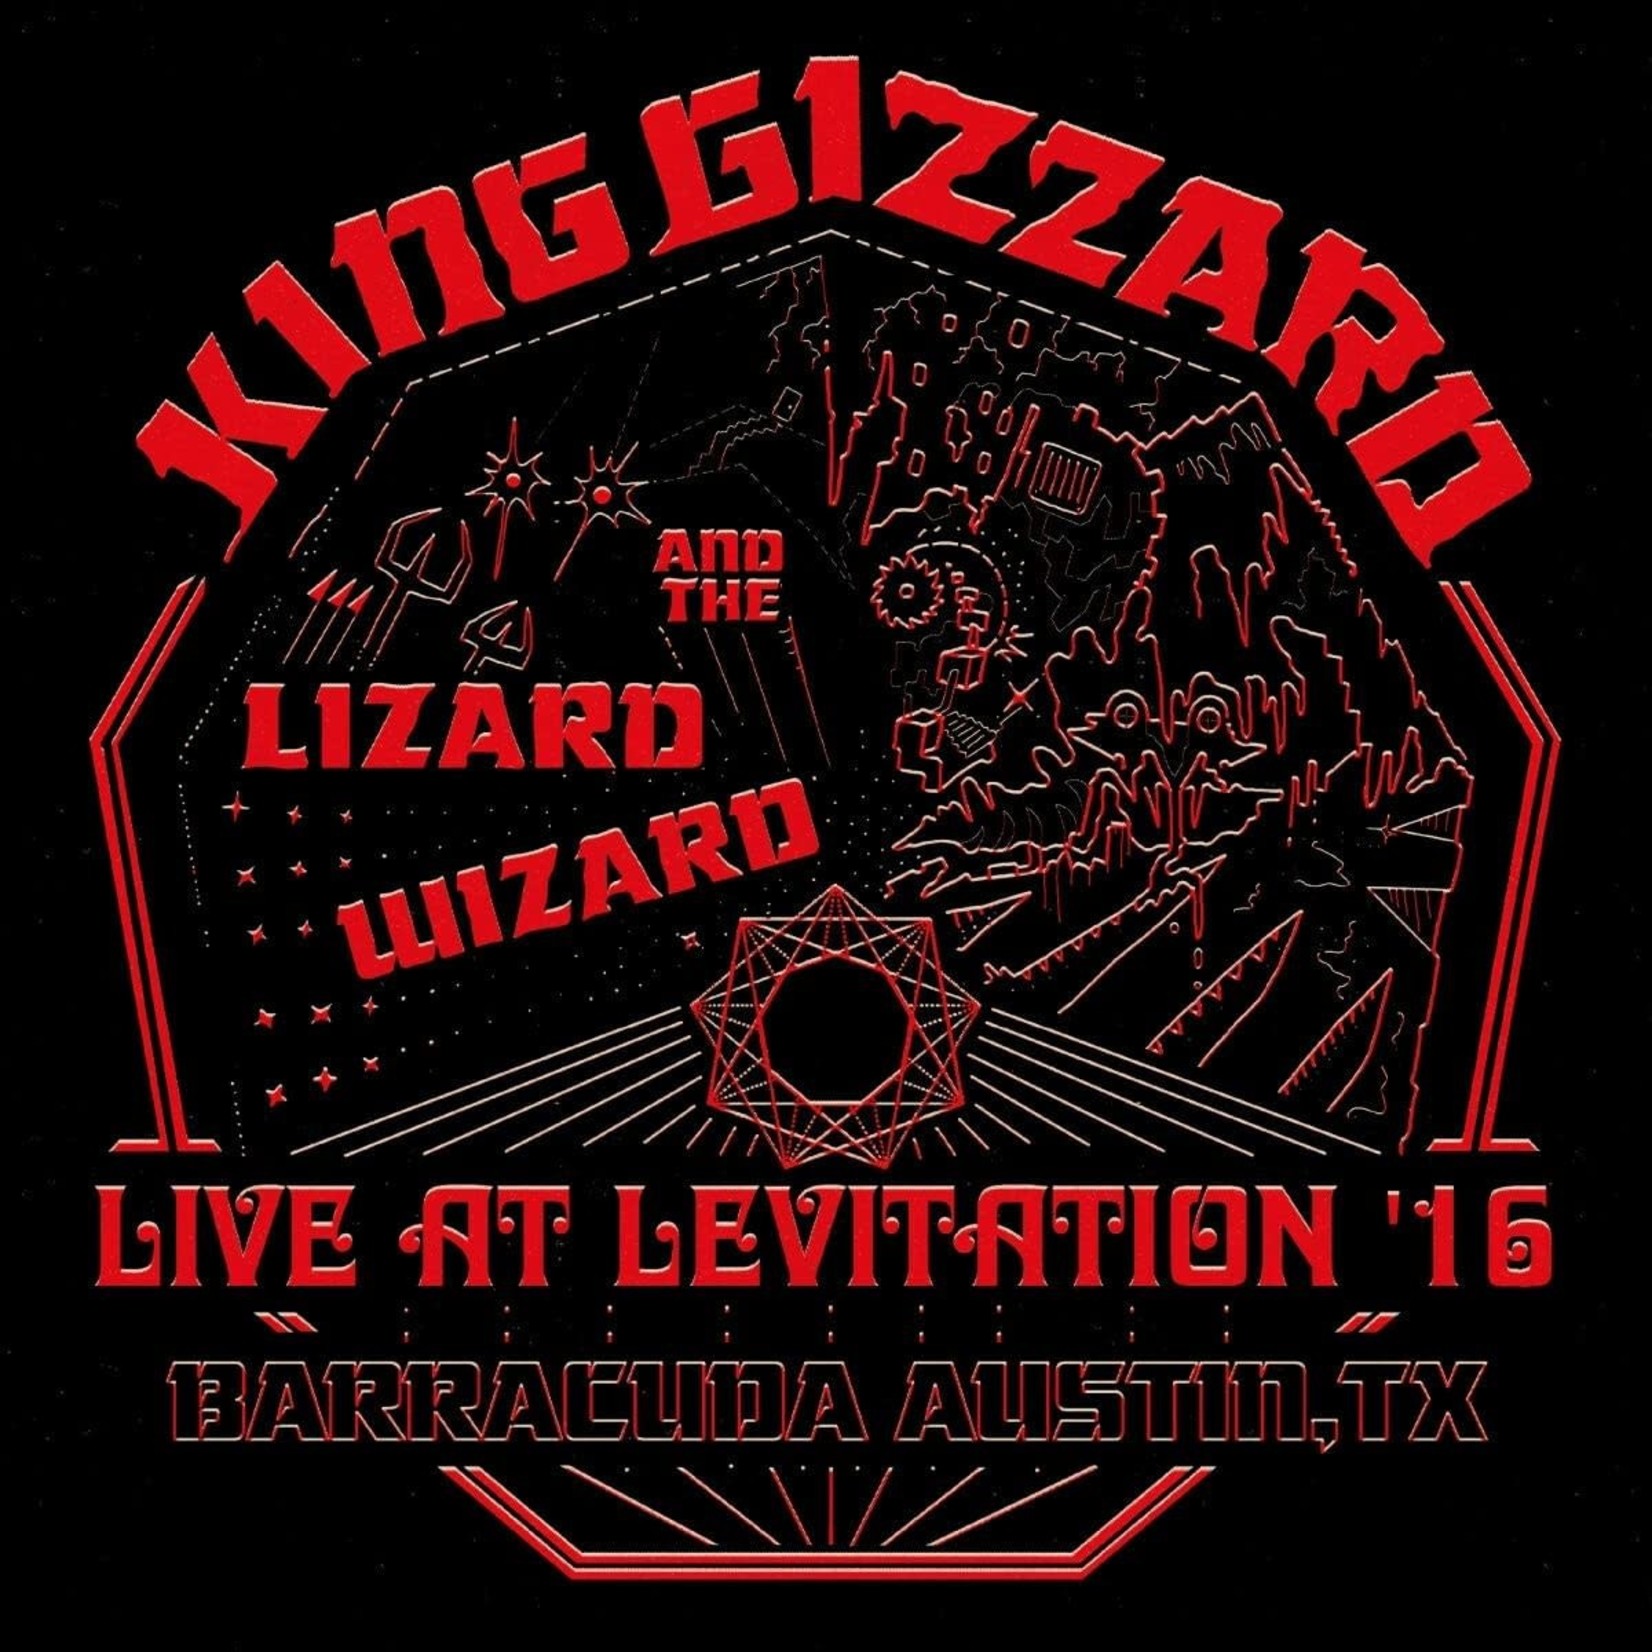 KING GIZZARD & THE LIZARD WIZARD LIVE AT LEVITATION '16 - RED VINYL LP